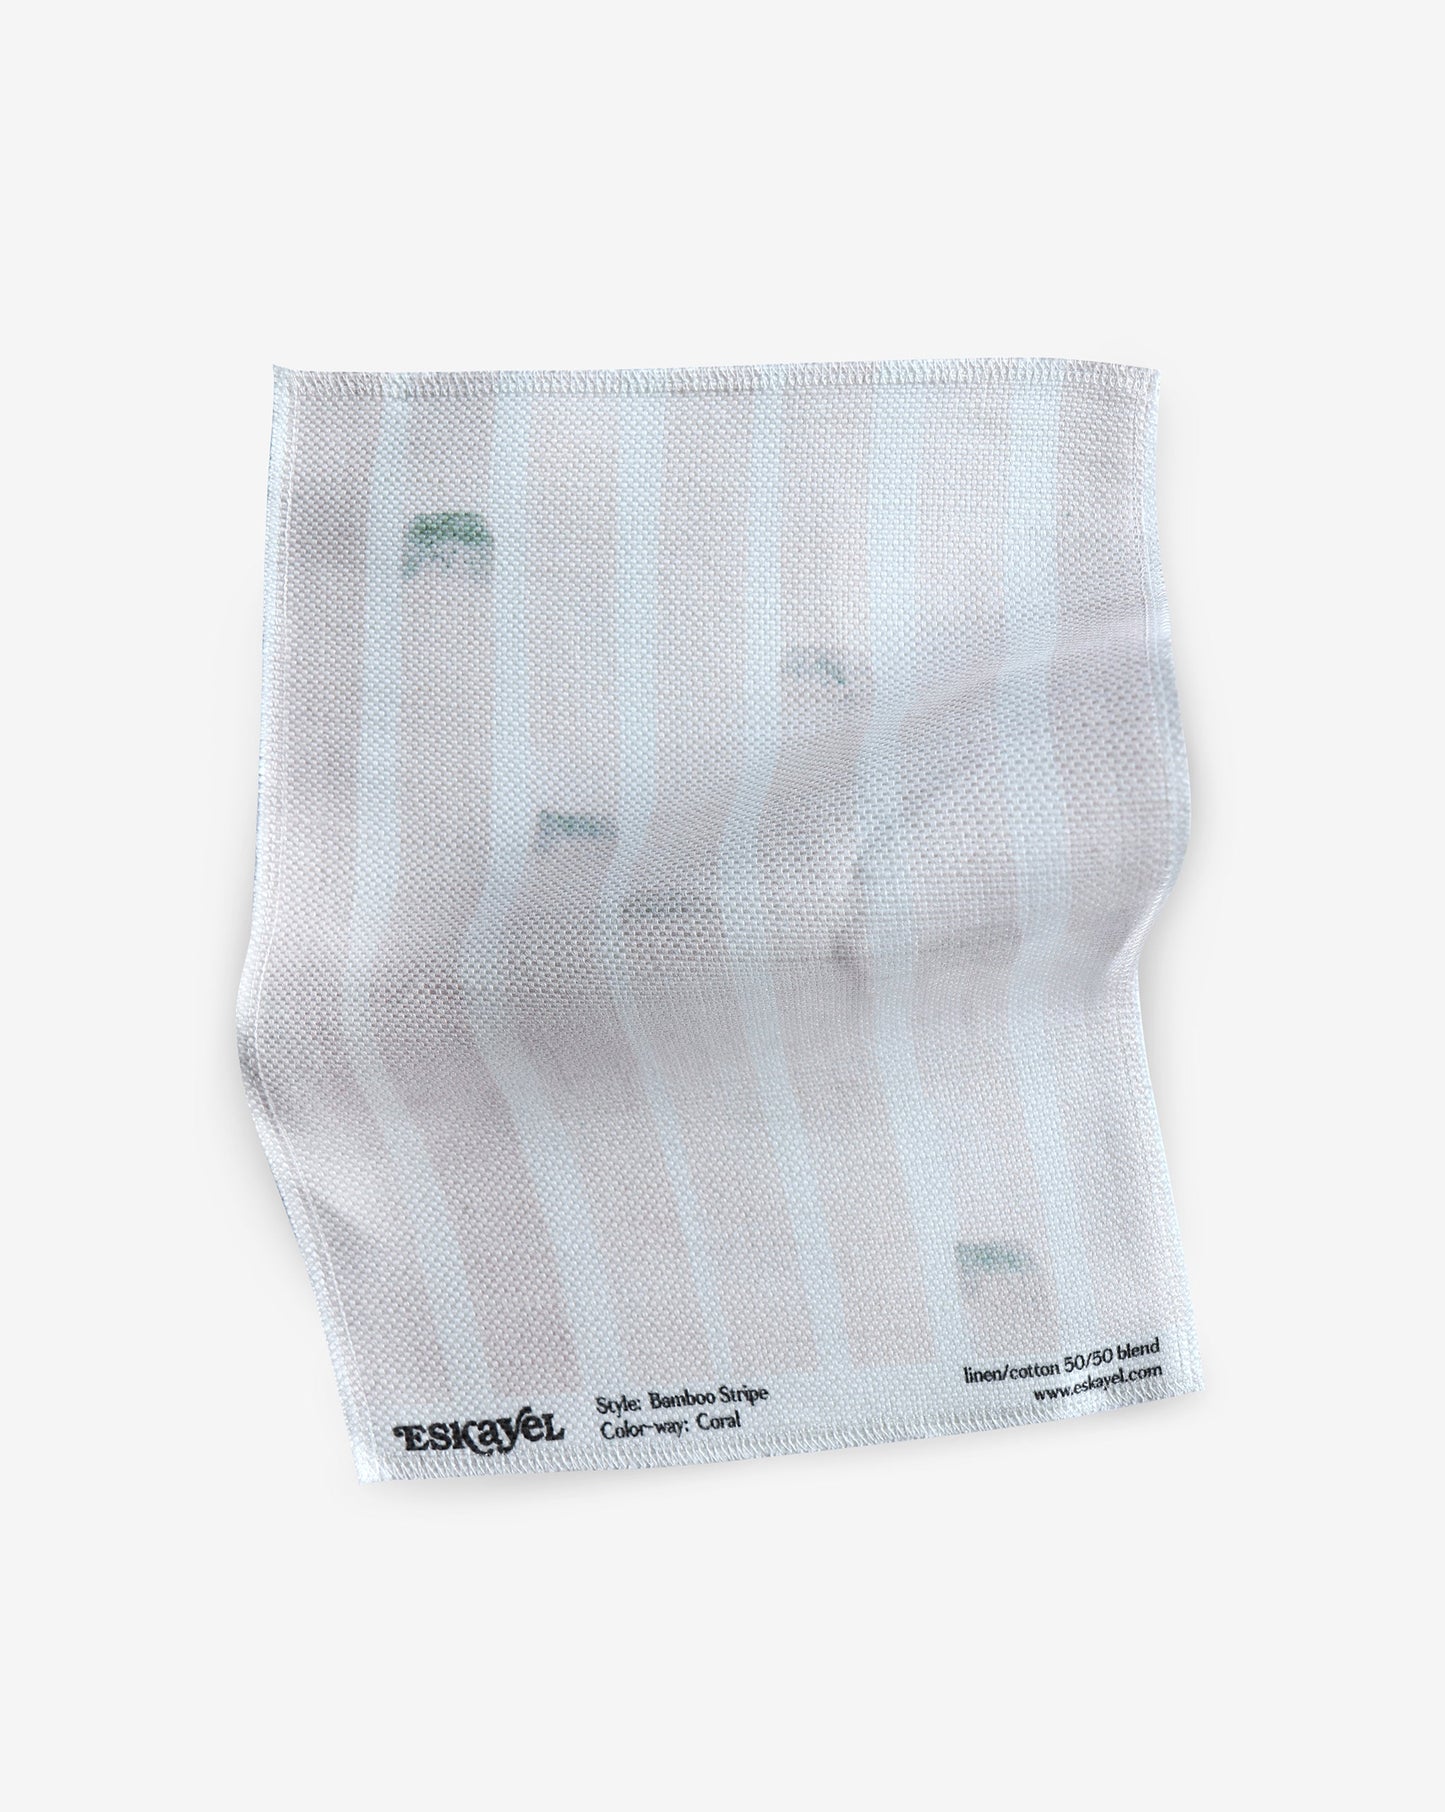 A white cloth with a green stripe from the Bamboo Stripe Fabric Coral range